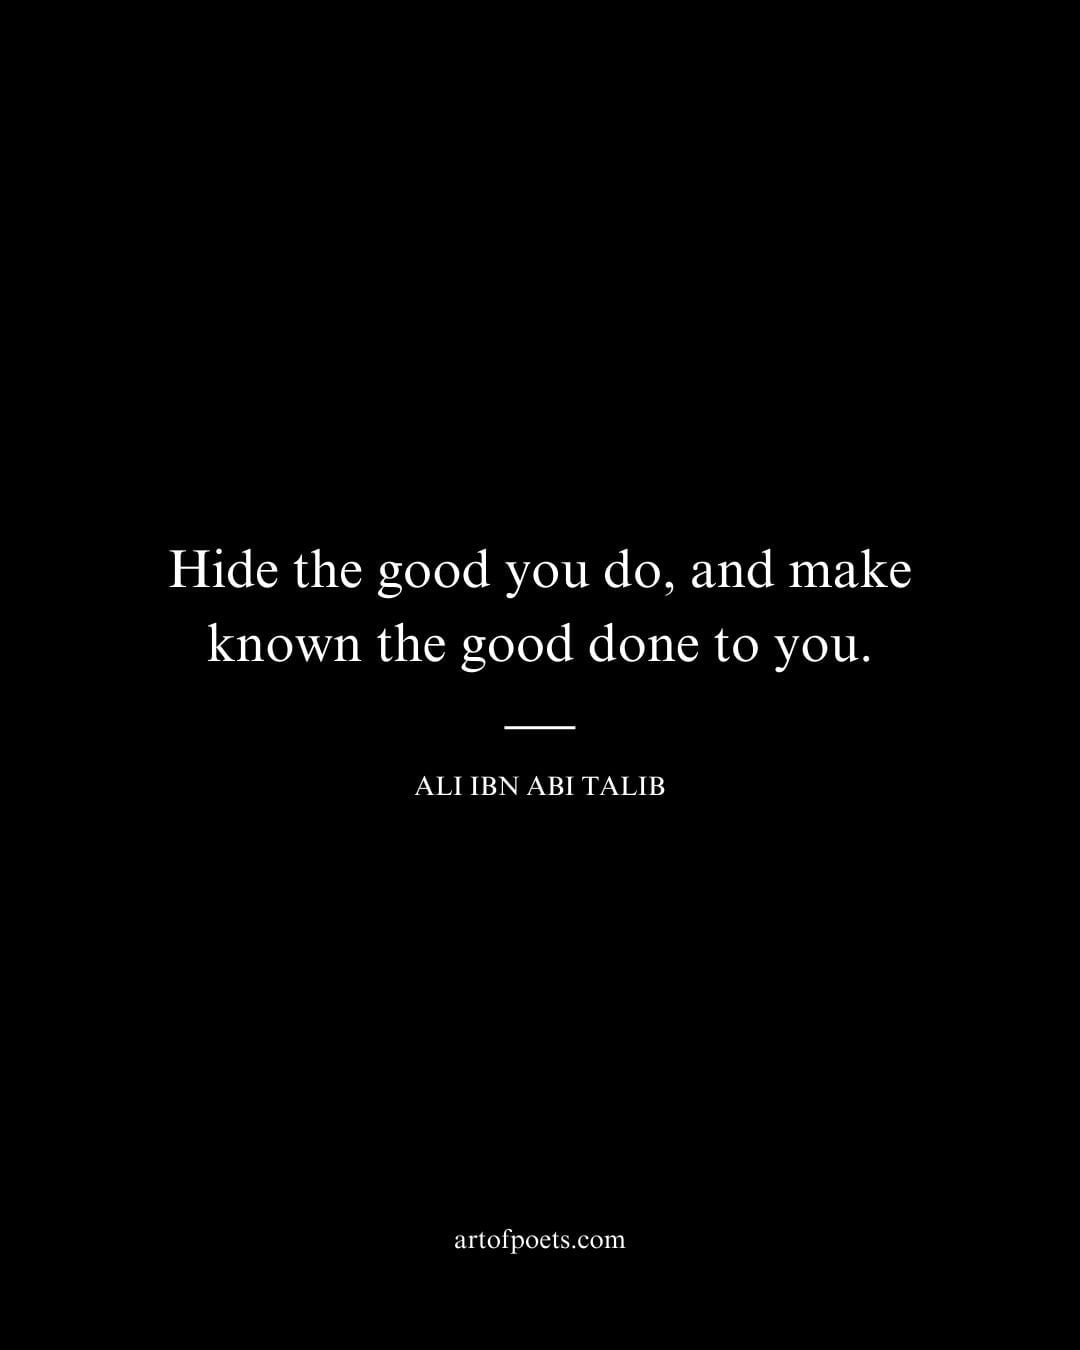 Hide the good you do and make known the good done to you